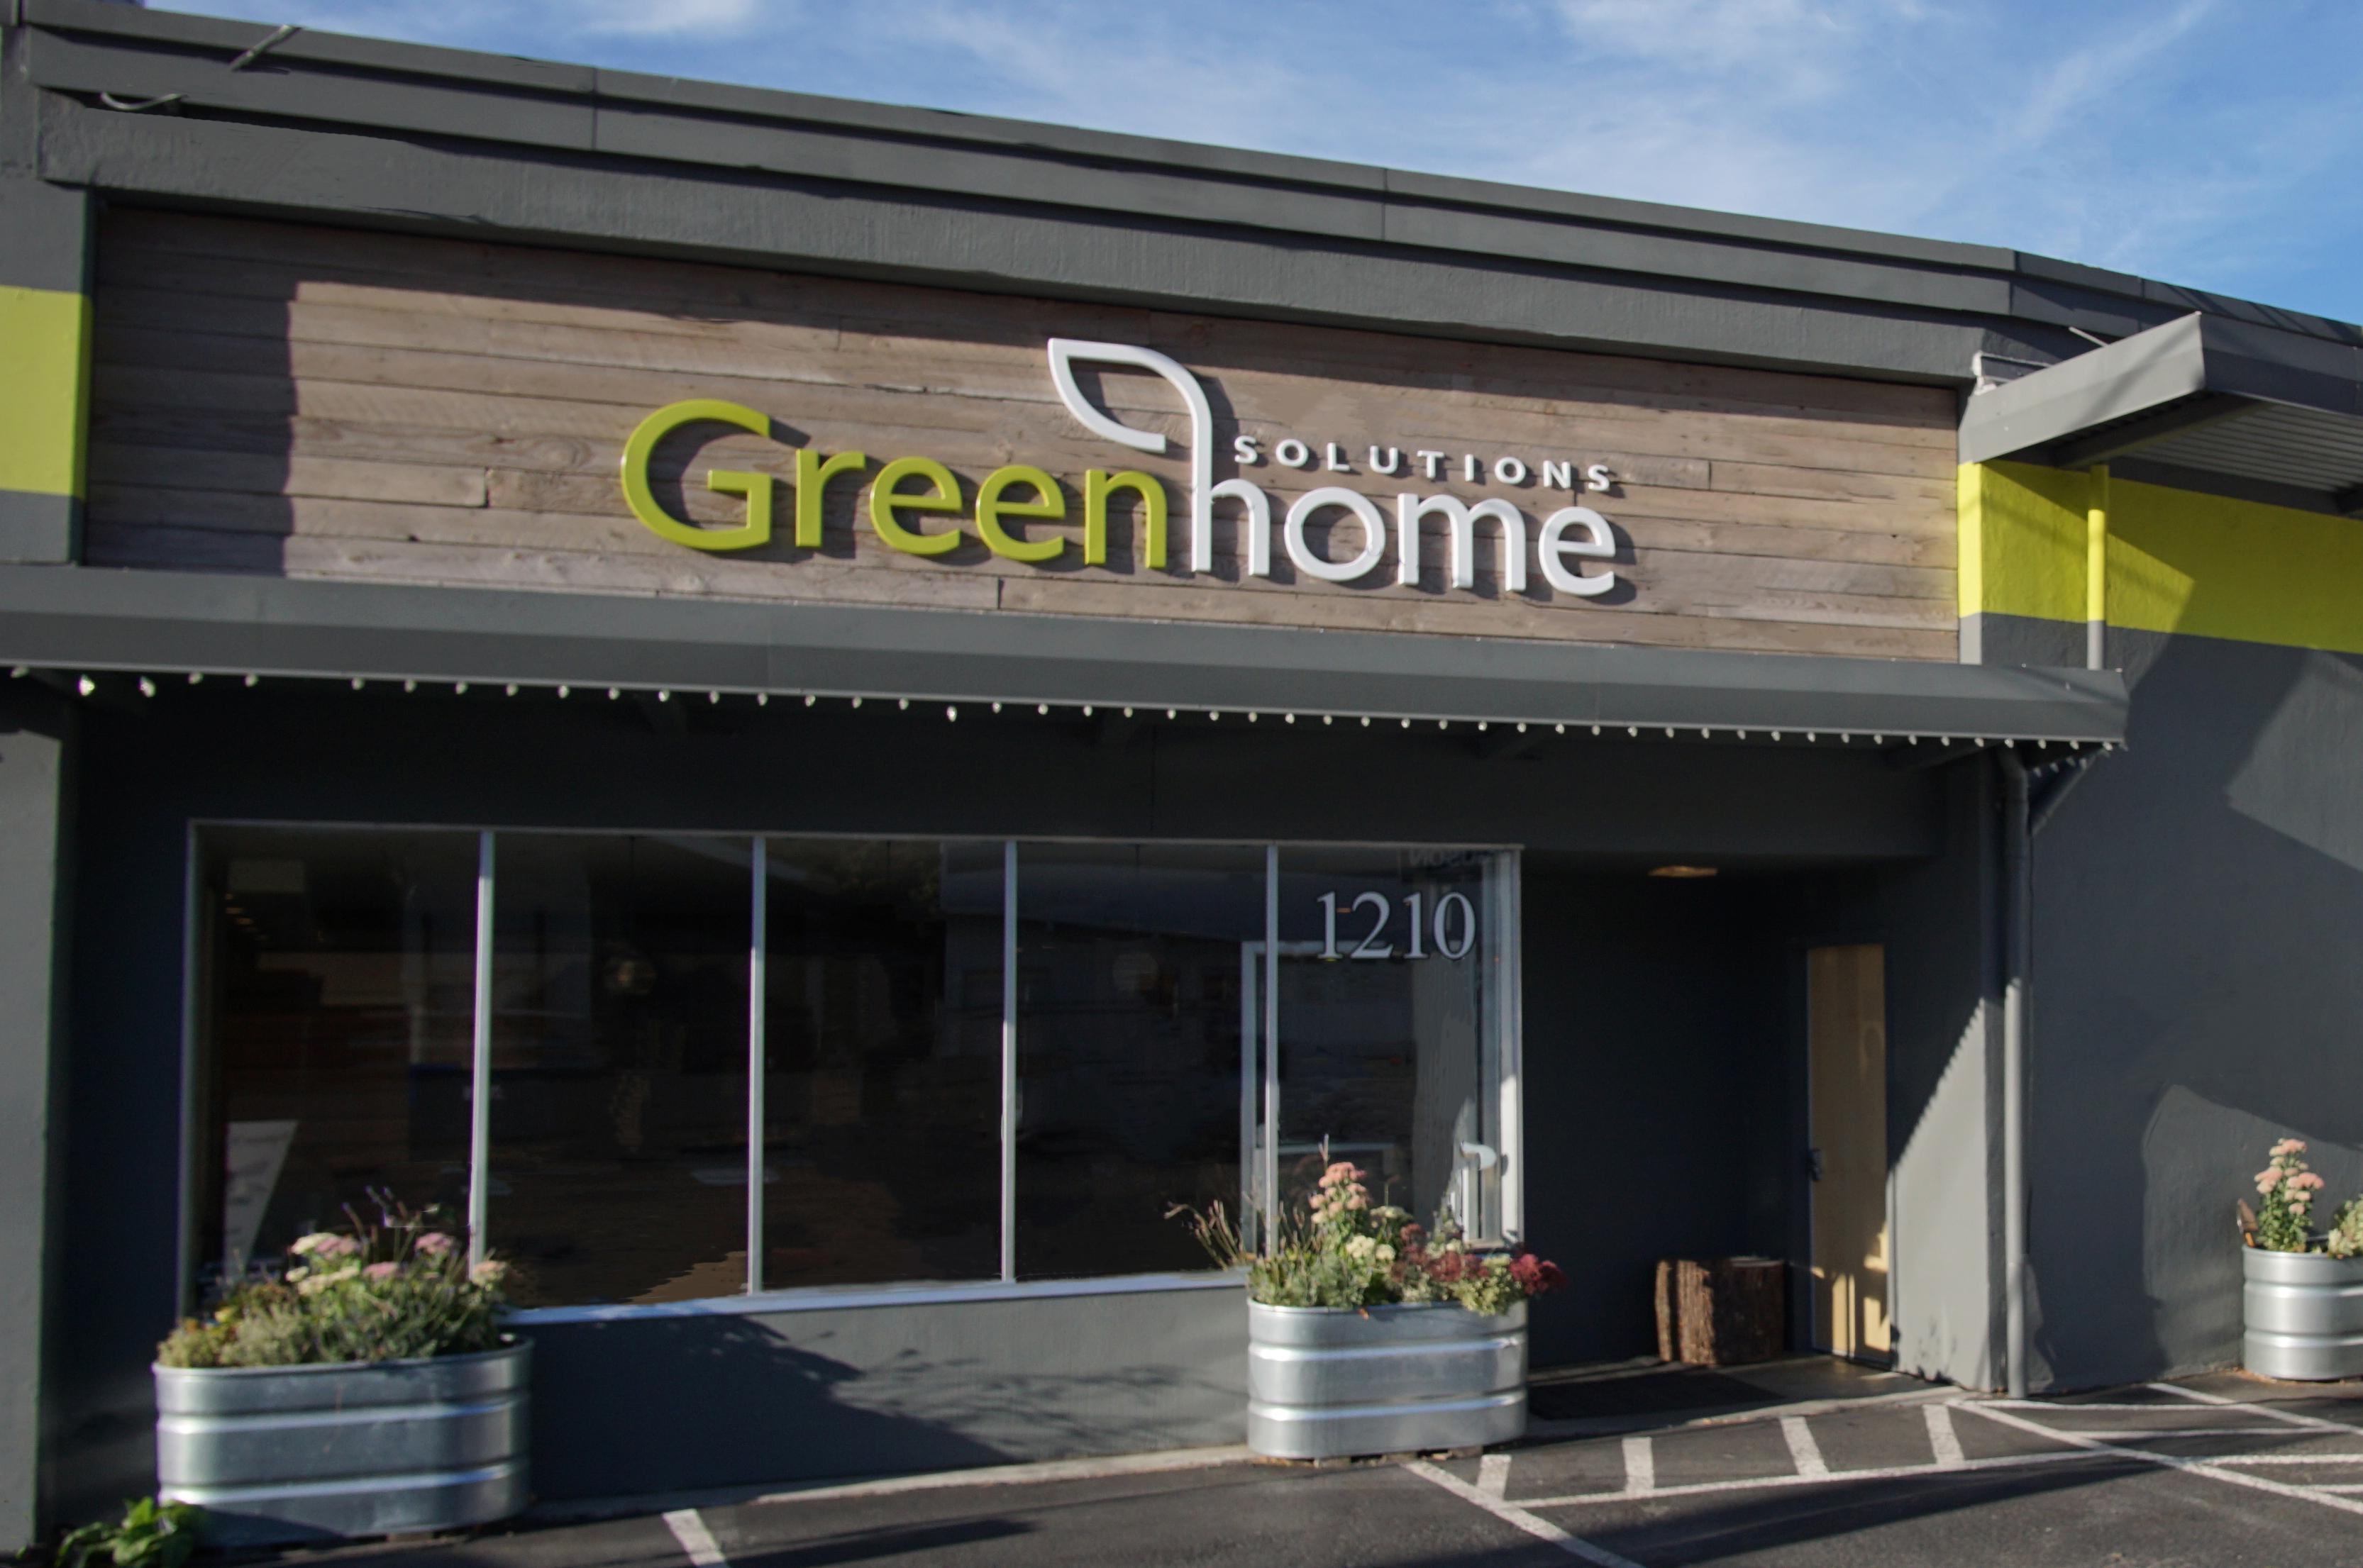 Greenhome Solutions Seattle (206)284-2281